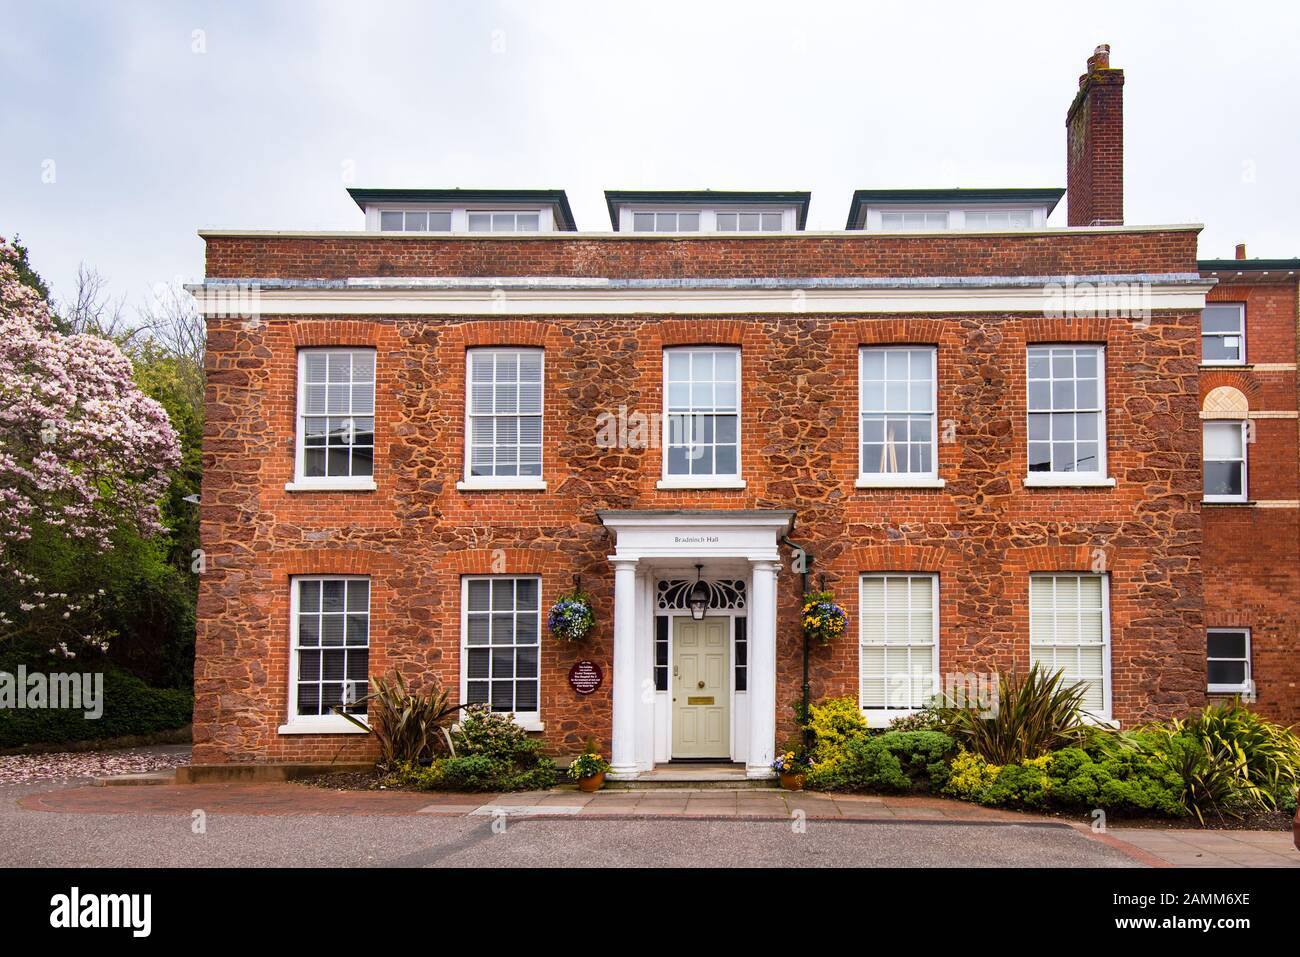 EXETER, DEVON, UK - 31MAR19: Bradnich Hall is in Castle Street Exeter, near the entrance to Rougemont Castle. Stock Photo